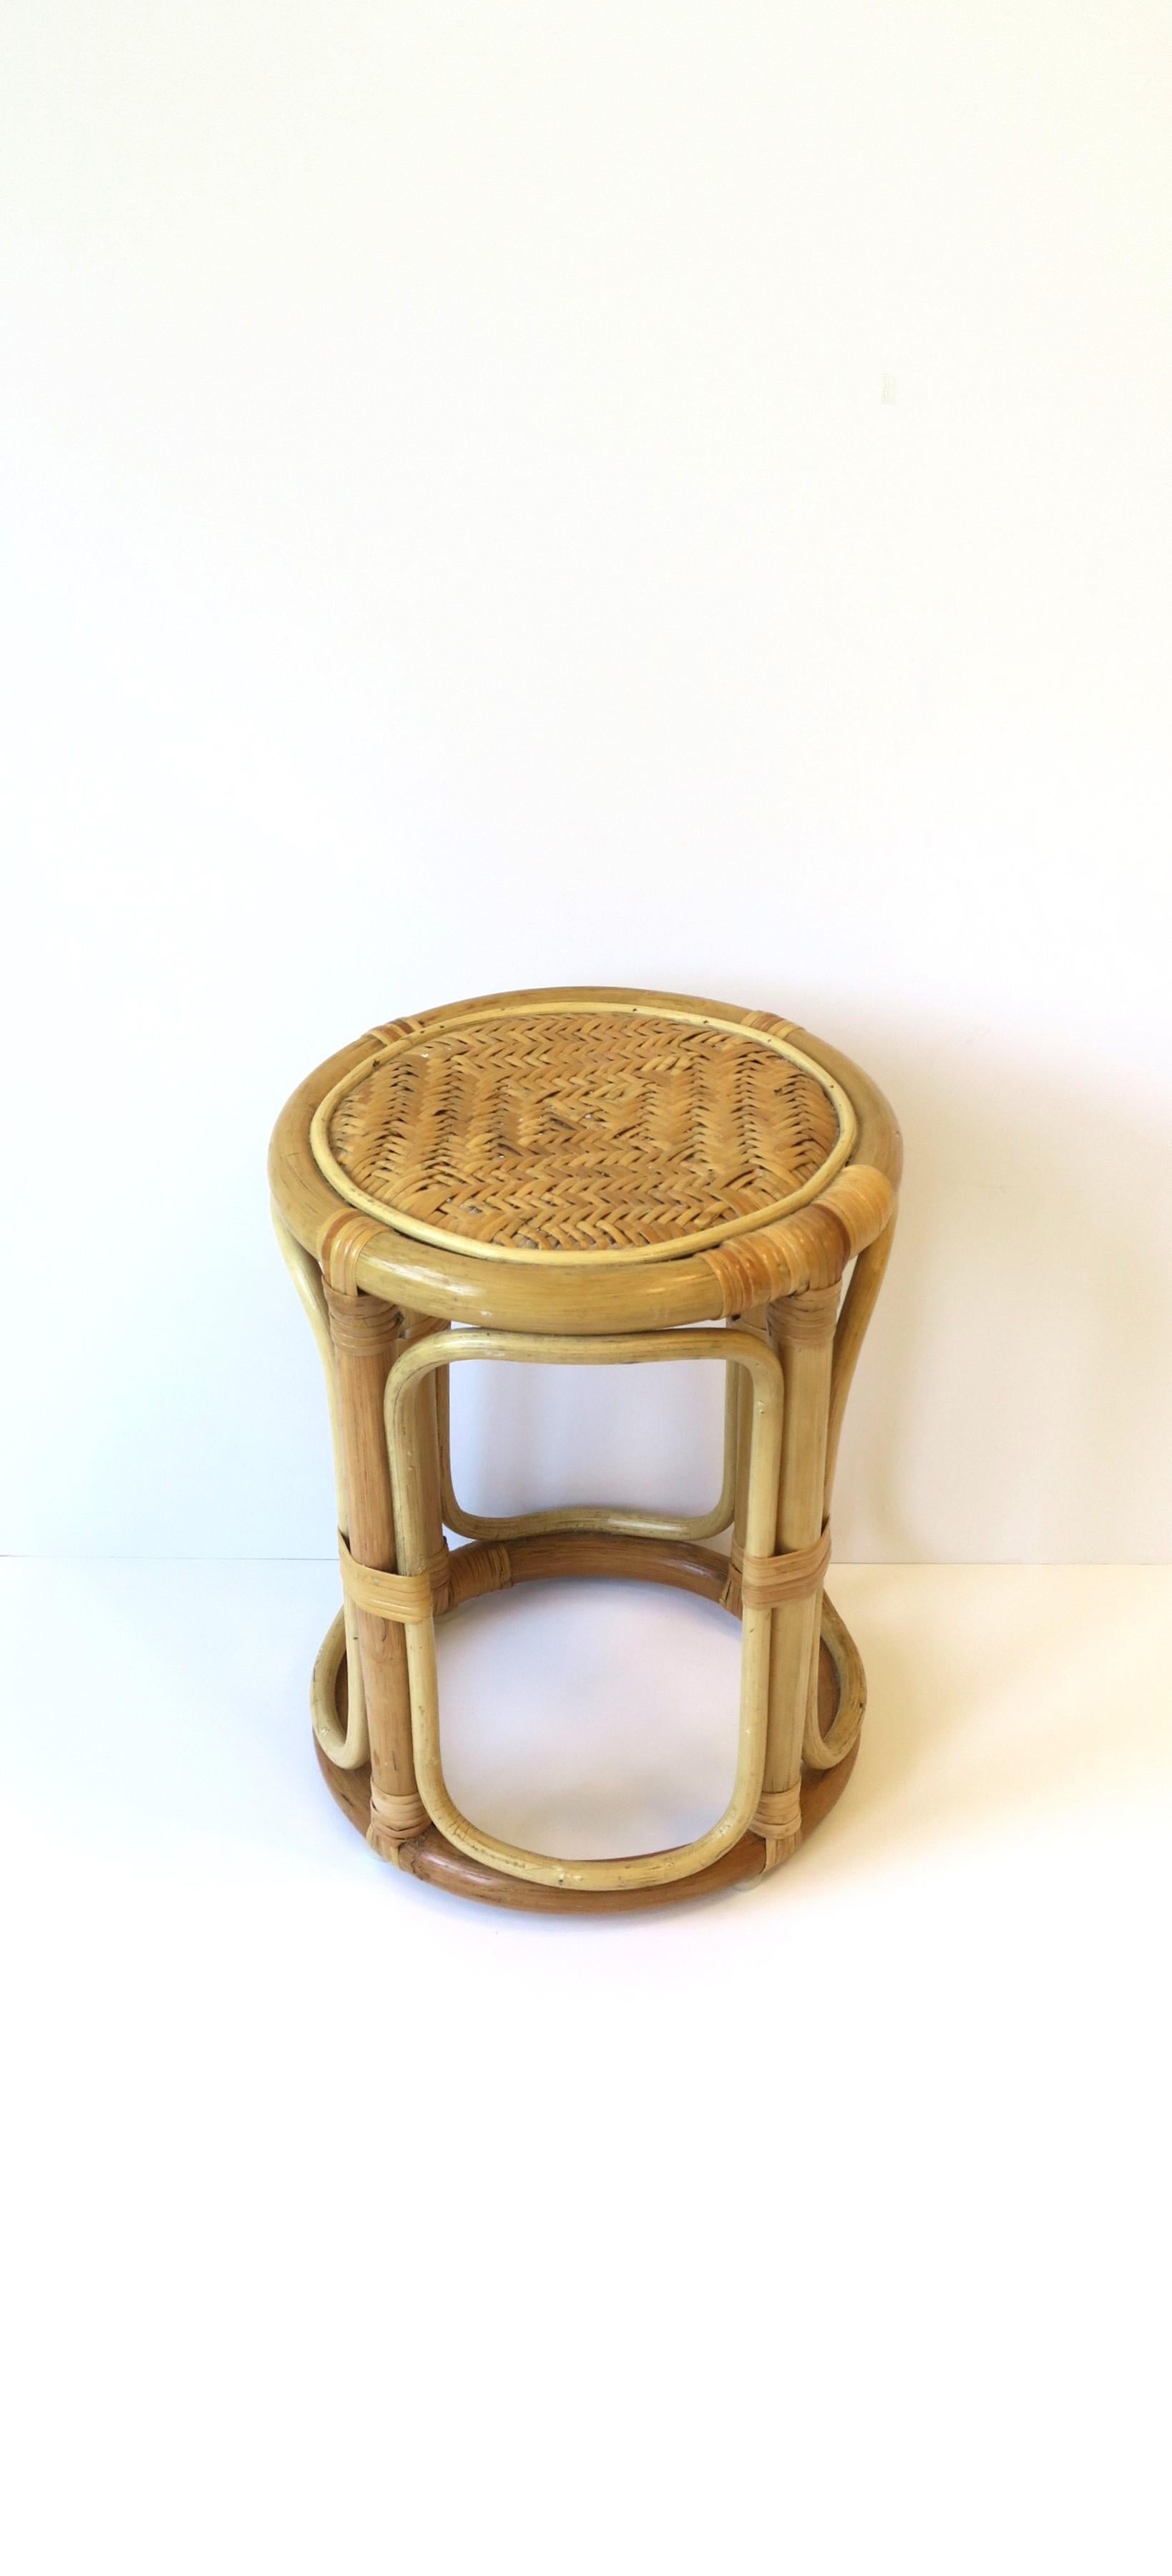 Wicker Rattan Stool or Drinks Table In Good Condition For Sale In New York, NY